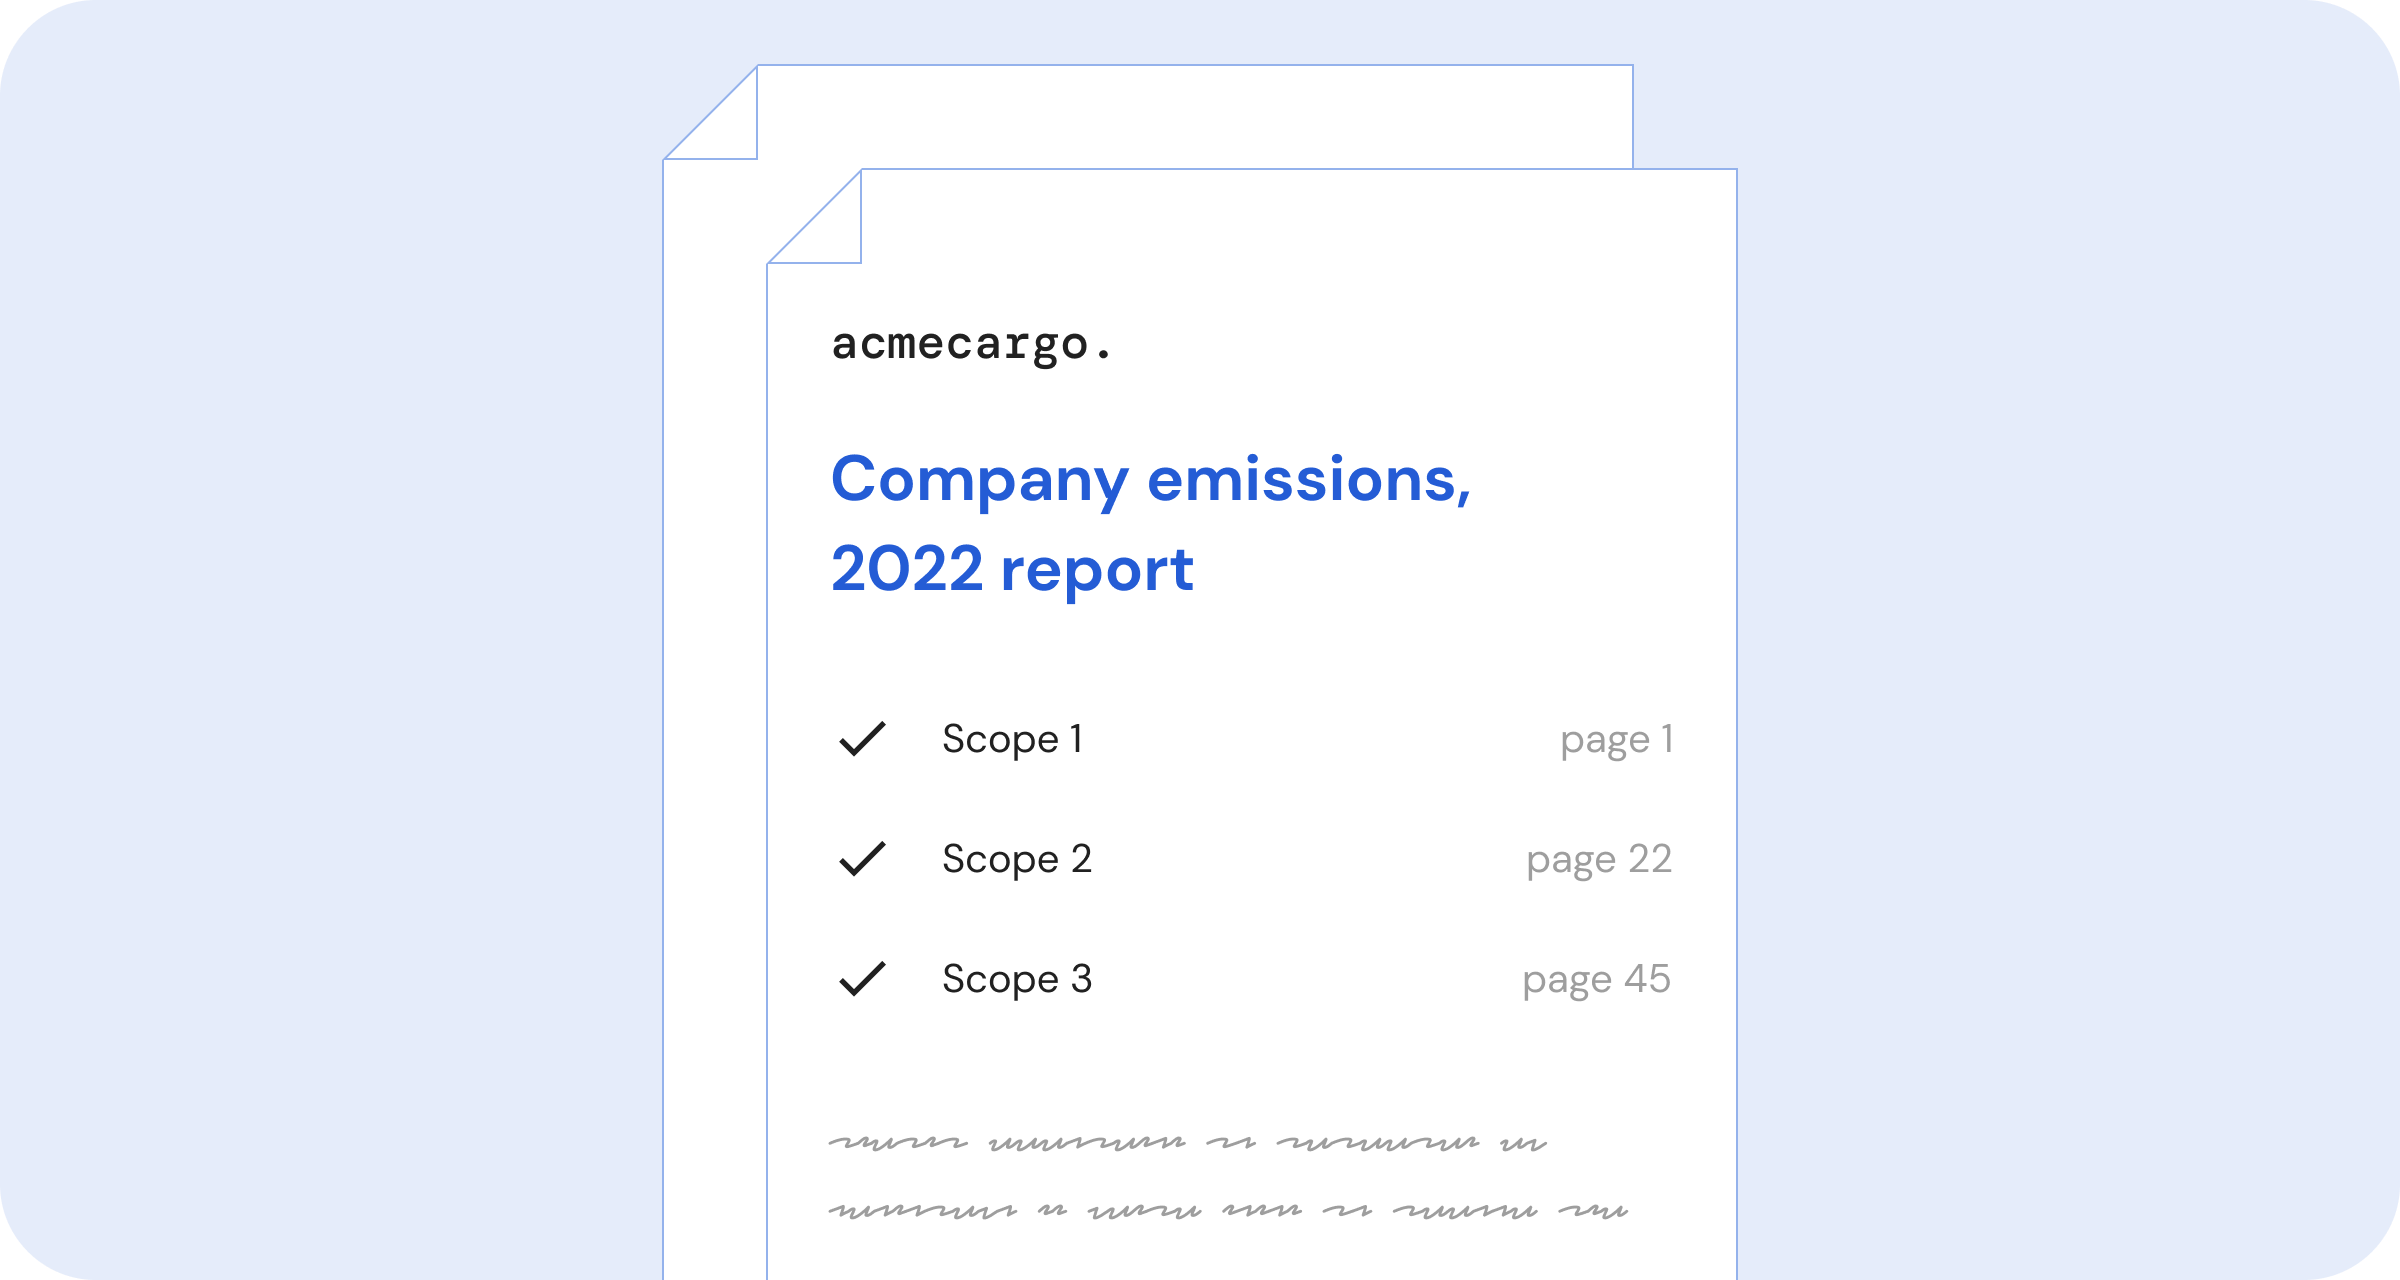 Mock up of acmecargo's Company emissions report for 2022